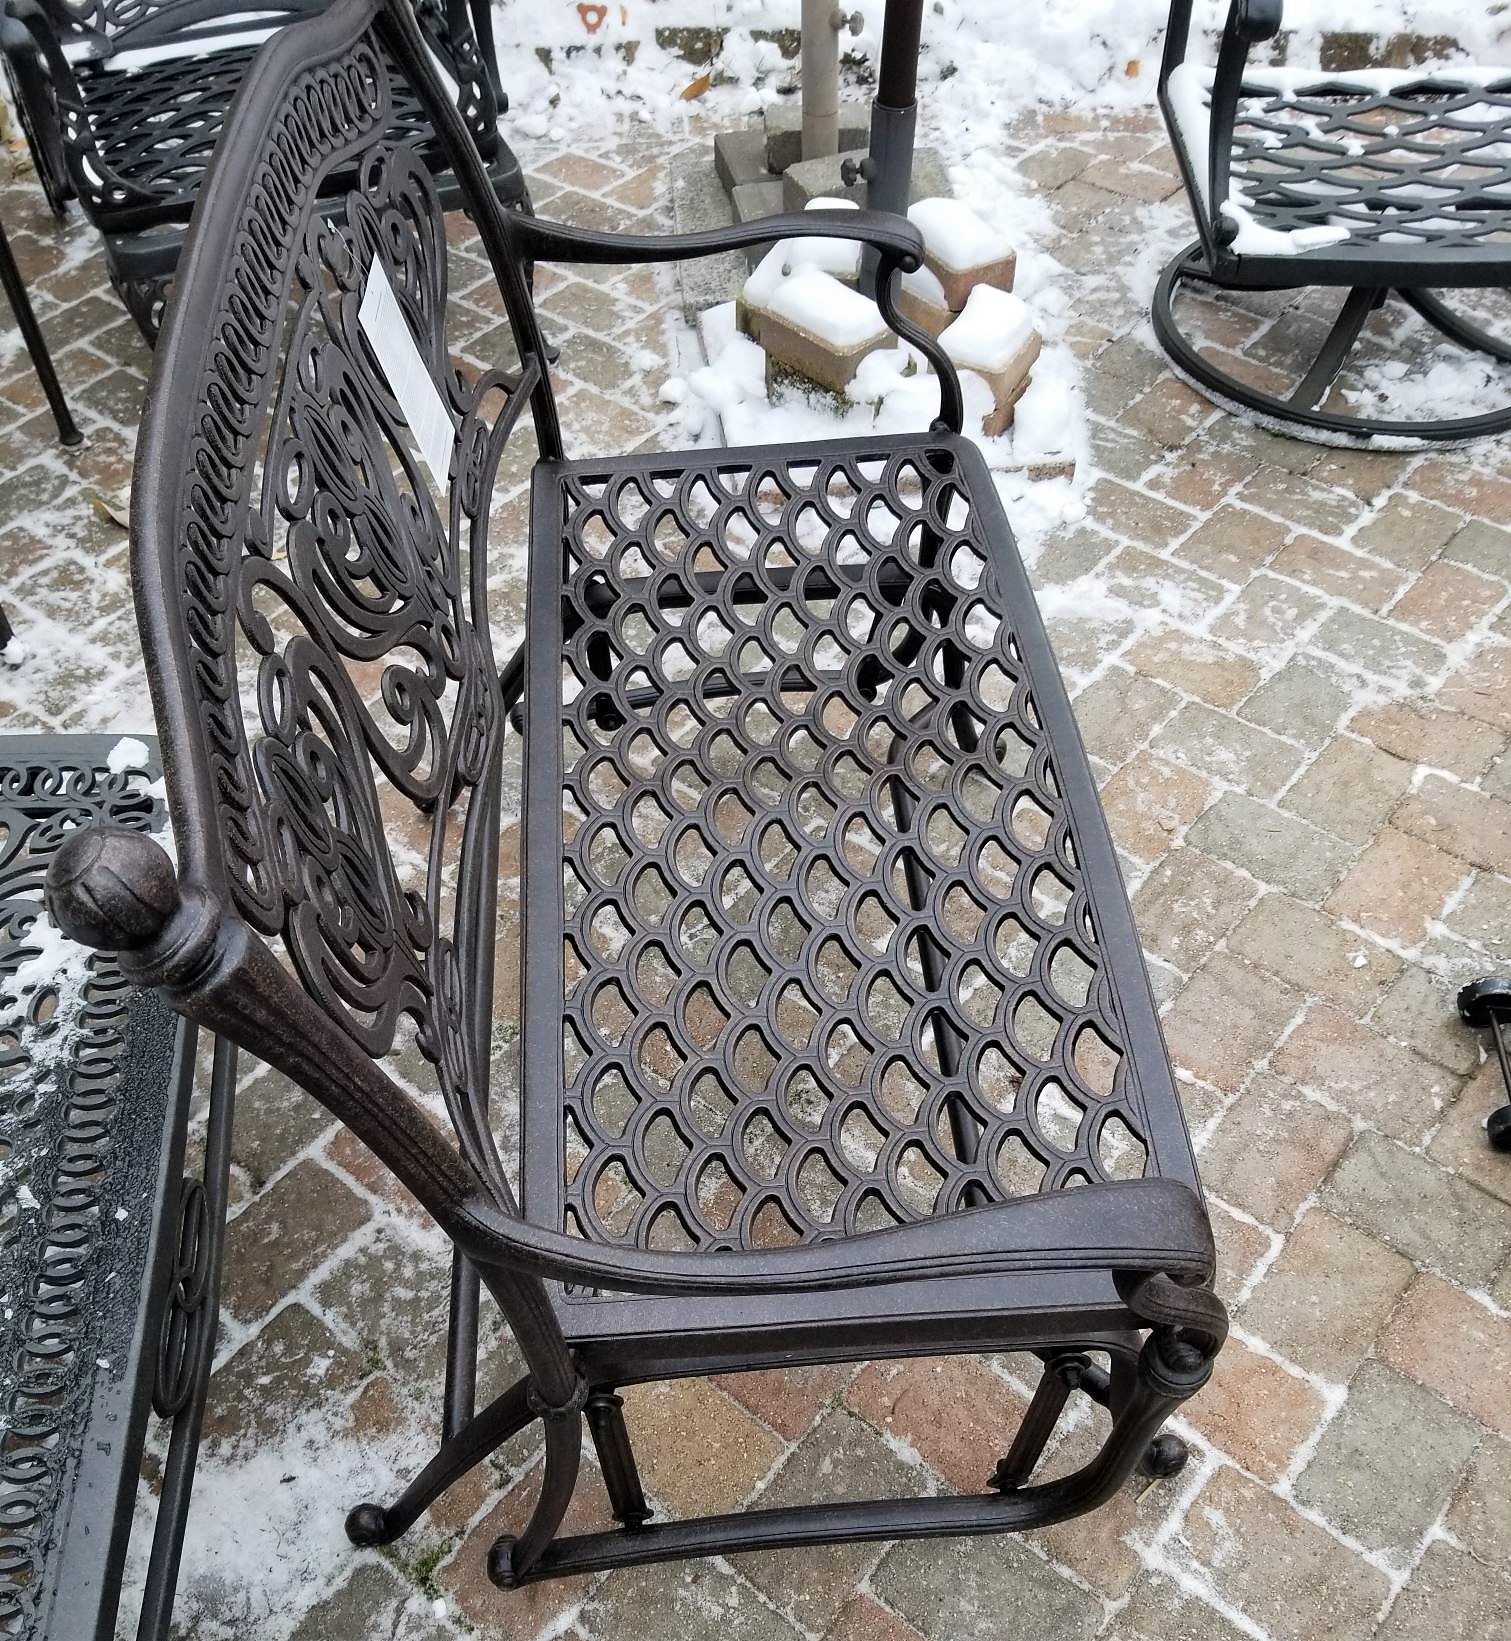 Transmotion Delivery Assembly Installation Relocation Morton Grove IL Hanamint Chateau 48 Round Enclosed Gas Fire Pit Table cheap fast eassy near me local downers grove IL chicago Washington California USA TRANSMOTION